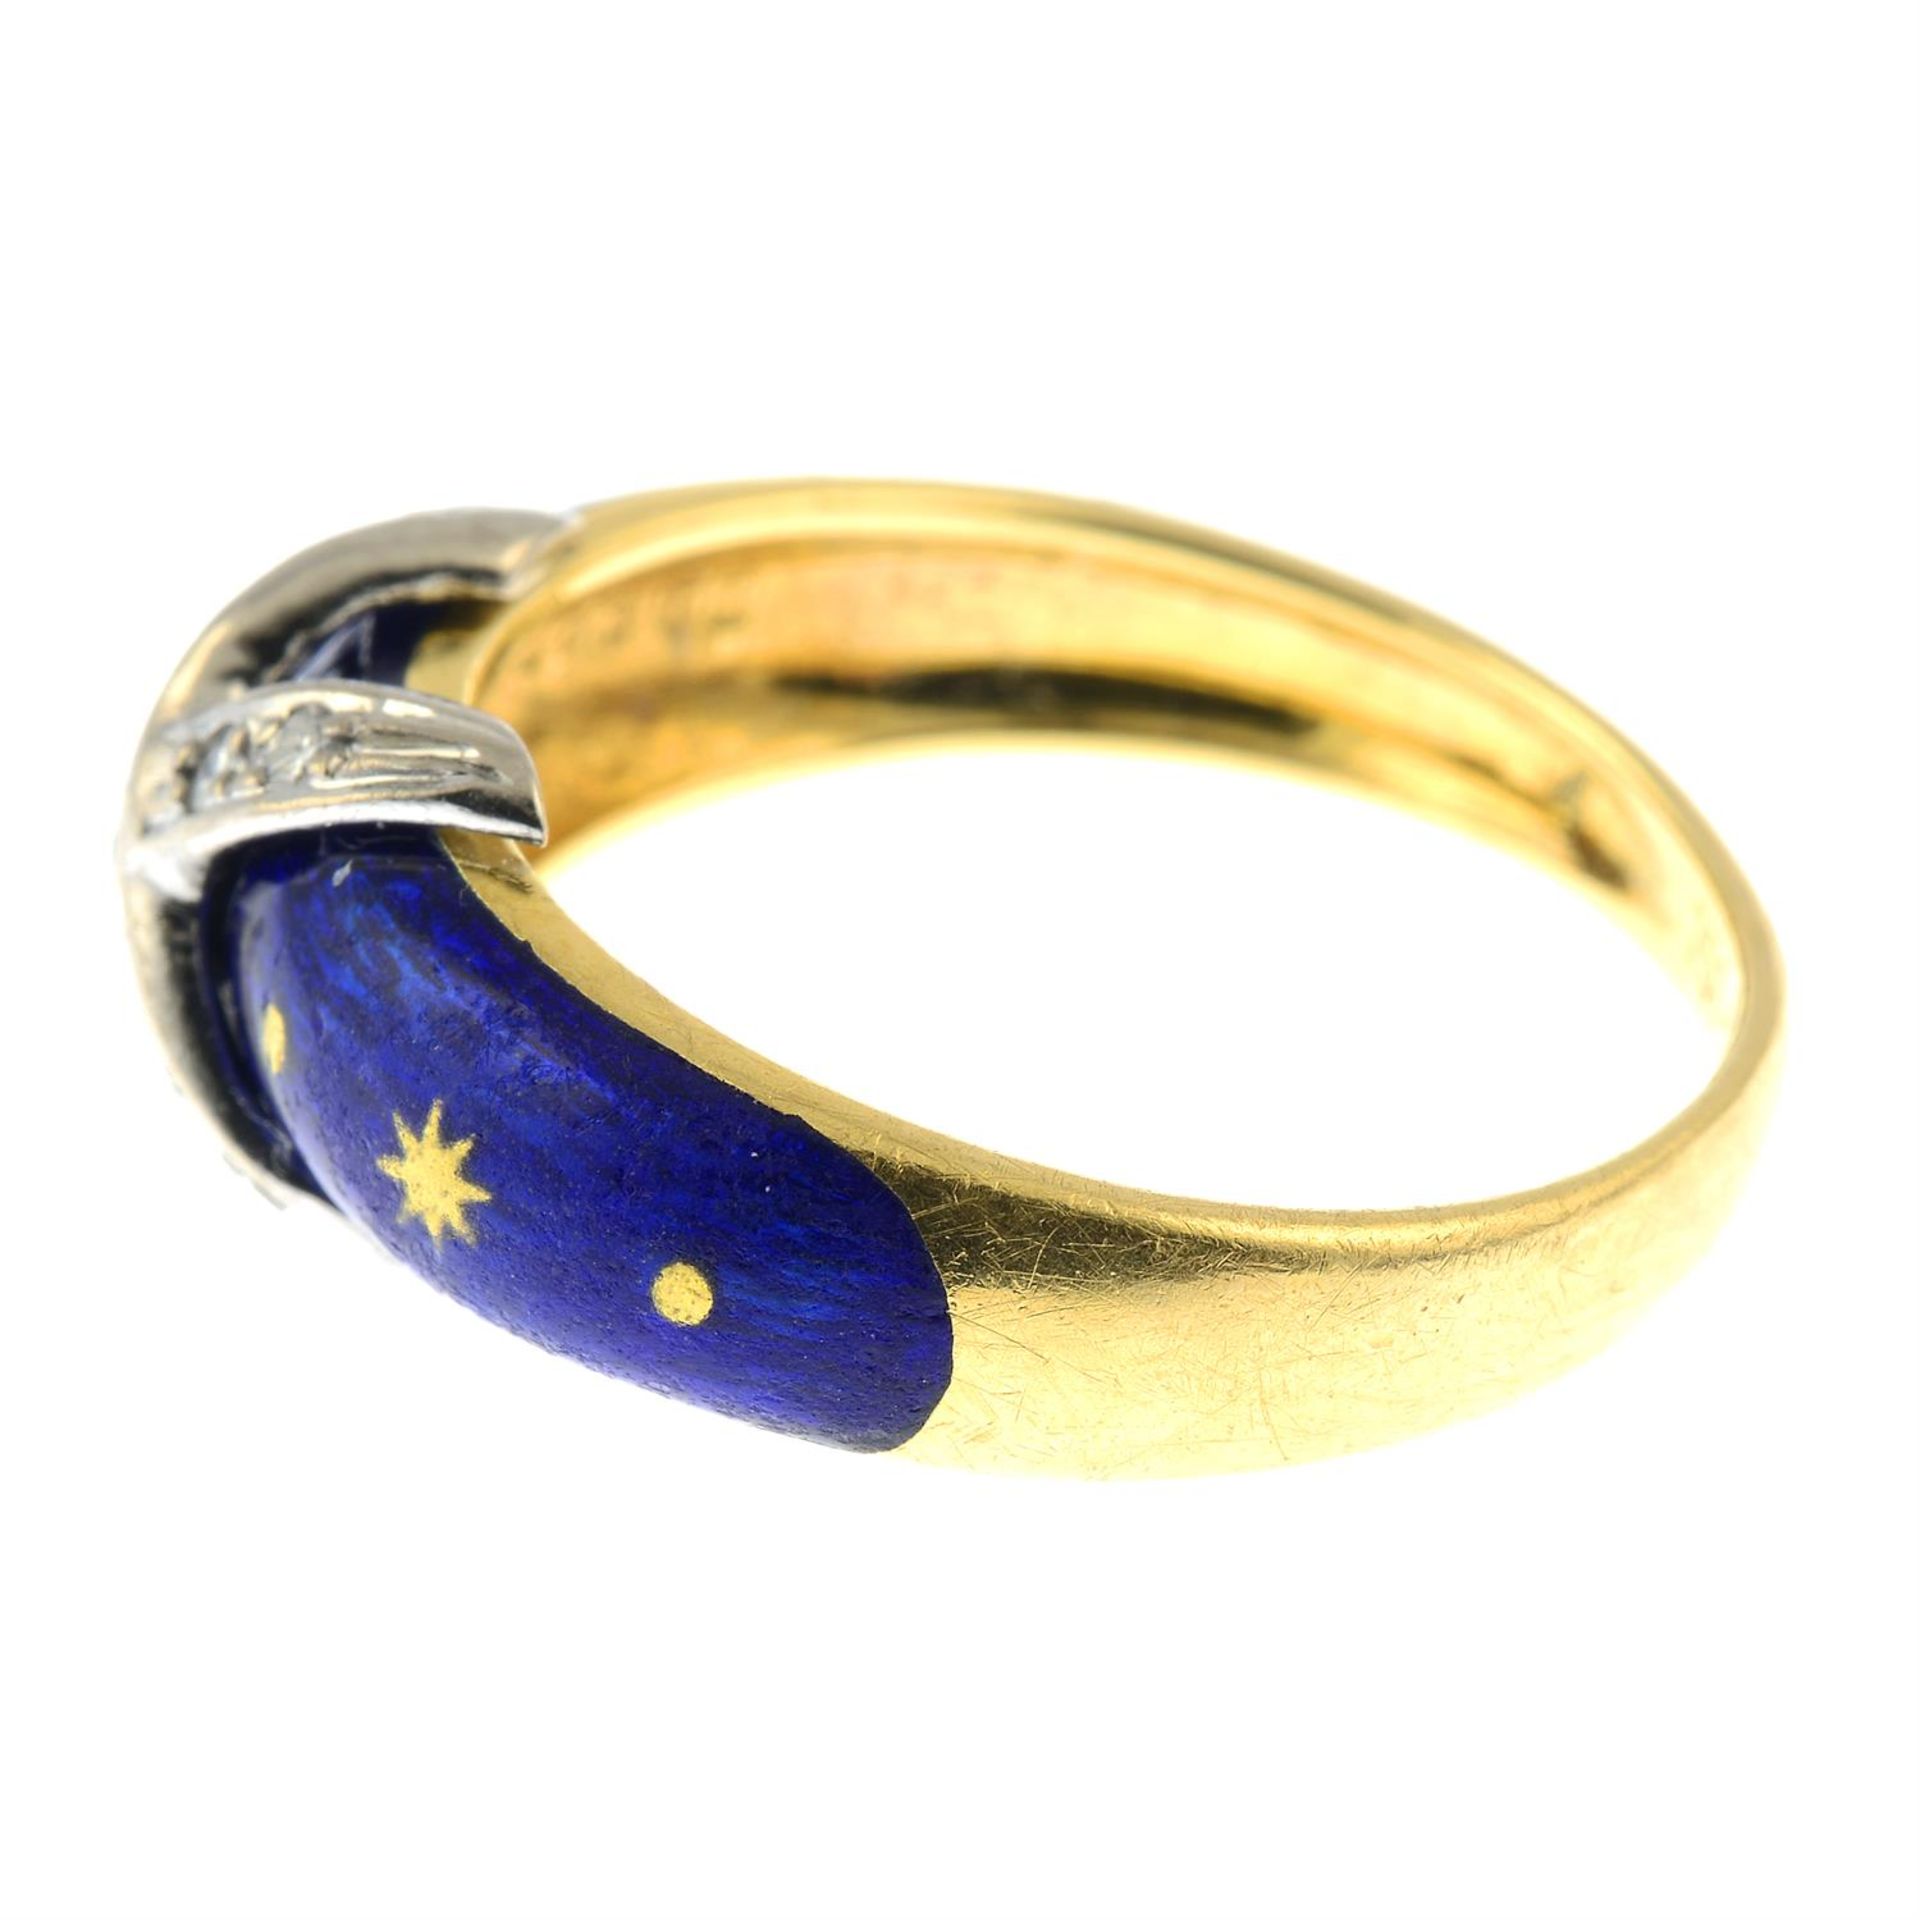 A limited edition diamond and blue enamel ring, by Victor Mayer for Fabergé. - Bild 3 aus 5